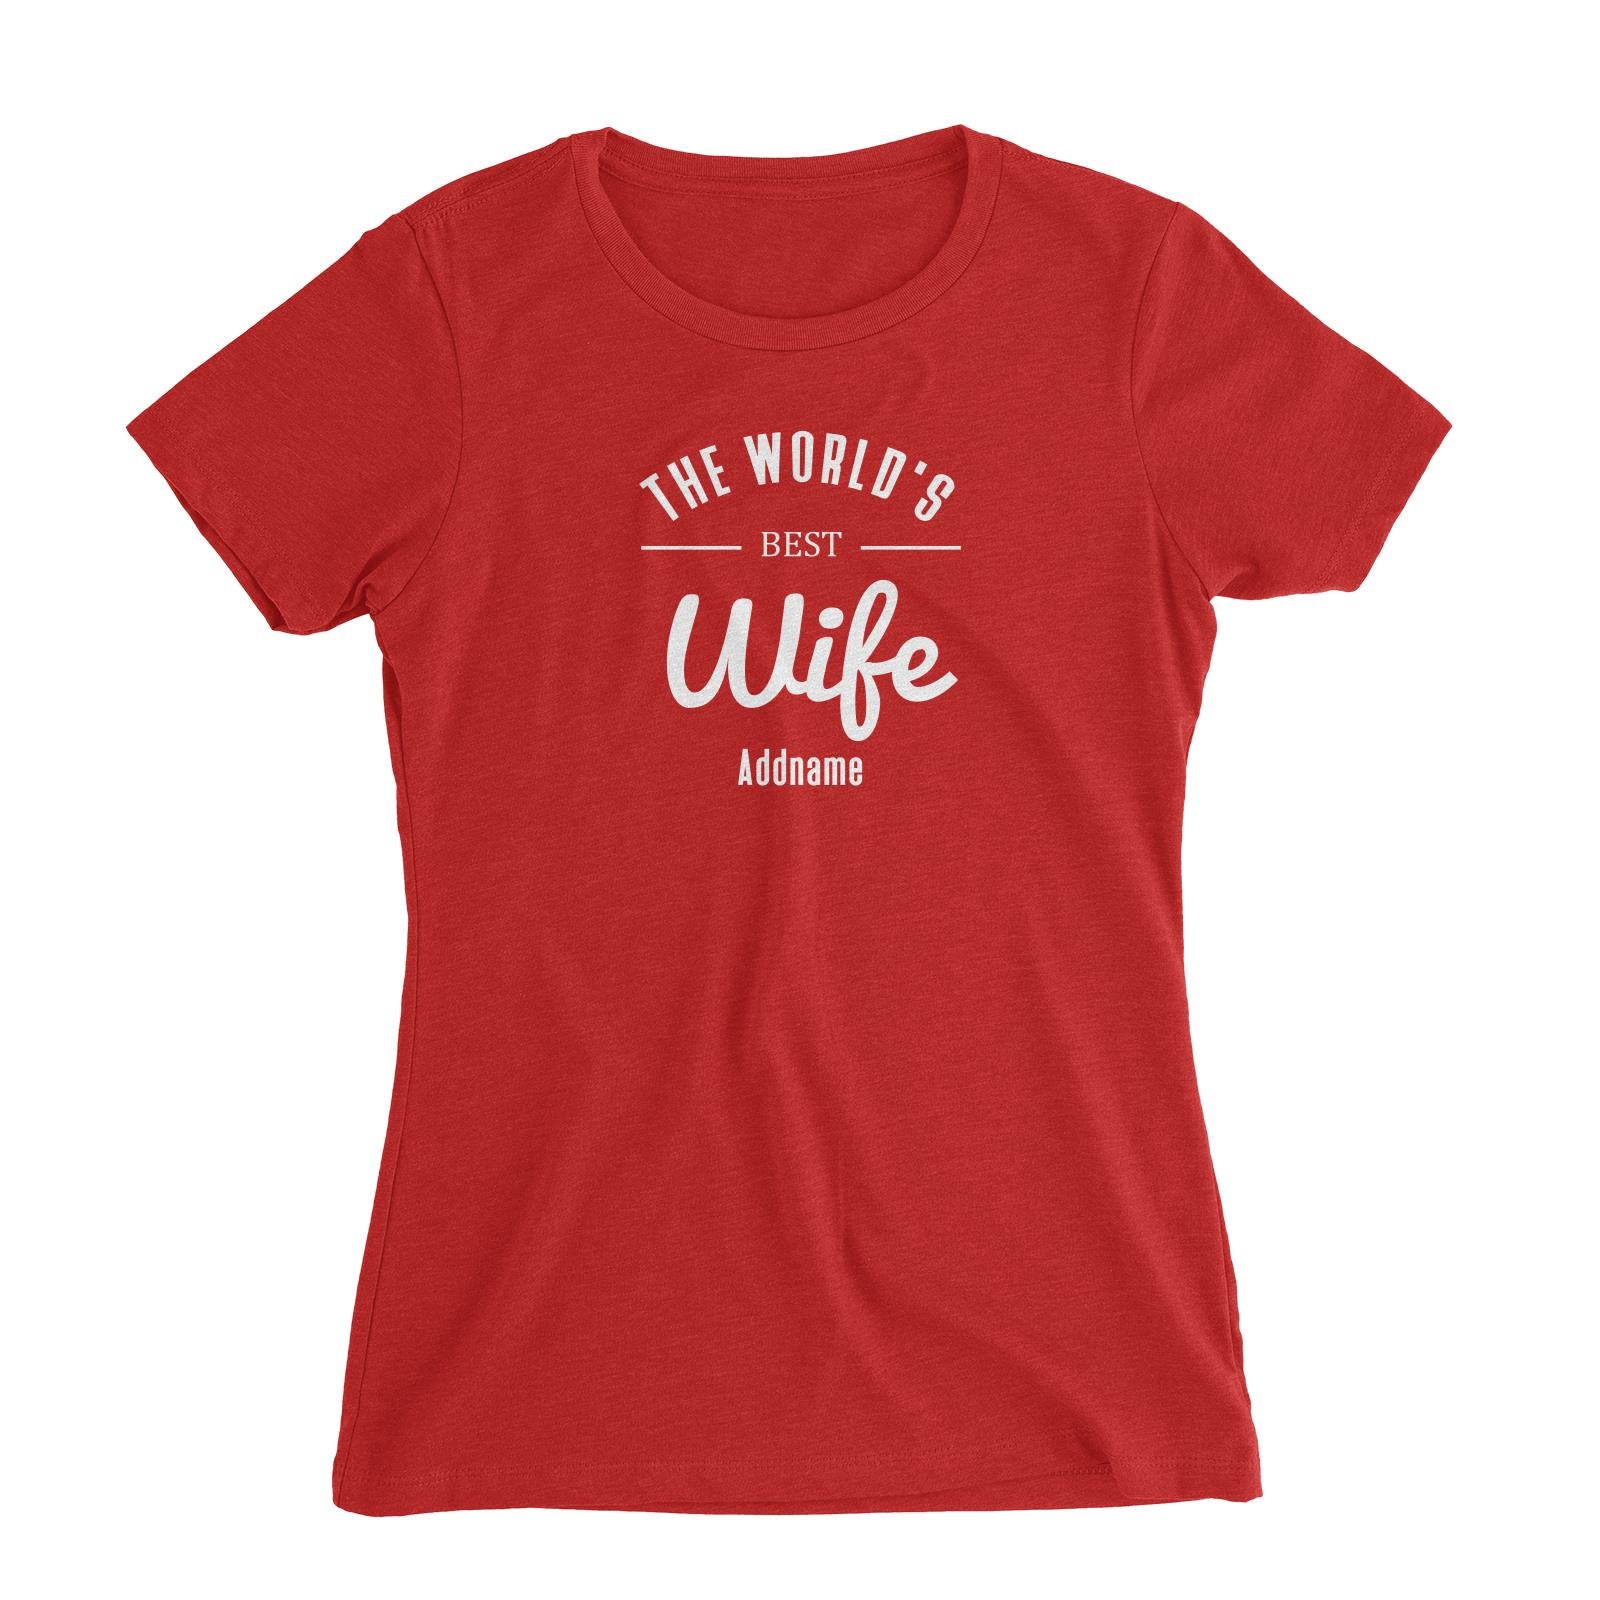 Husband and Wife The World's Best Wife Addname Women Slim Fit T-Shirt